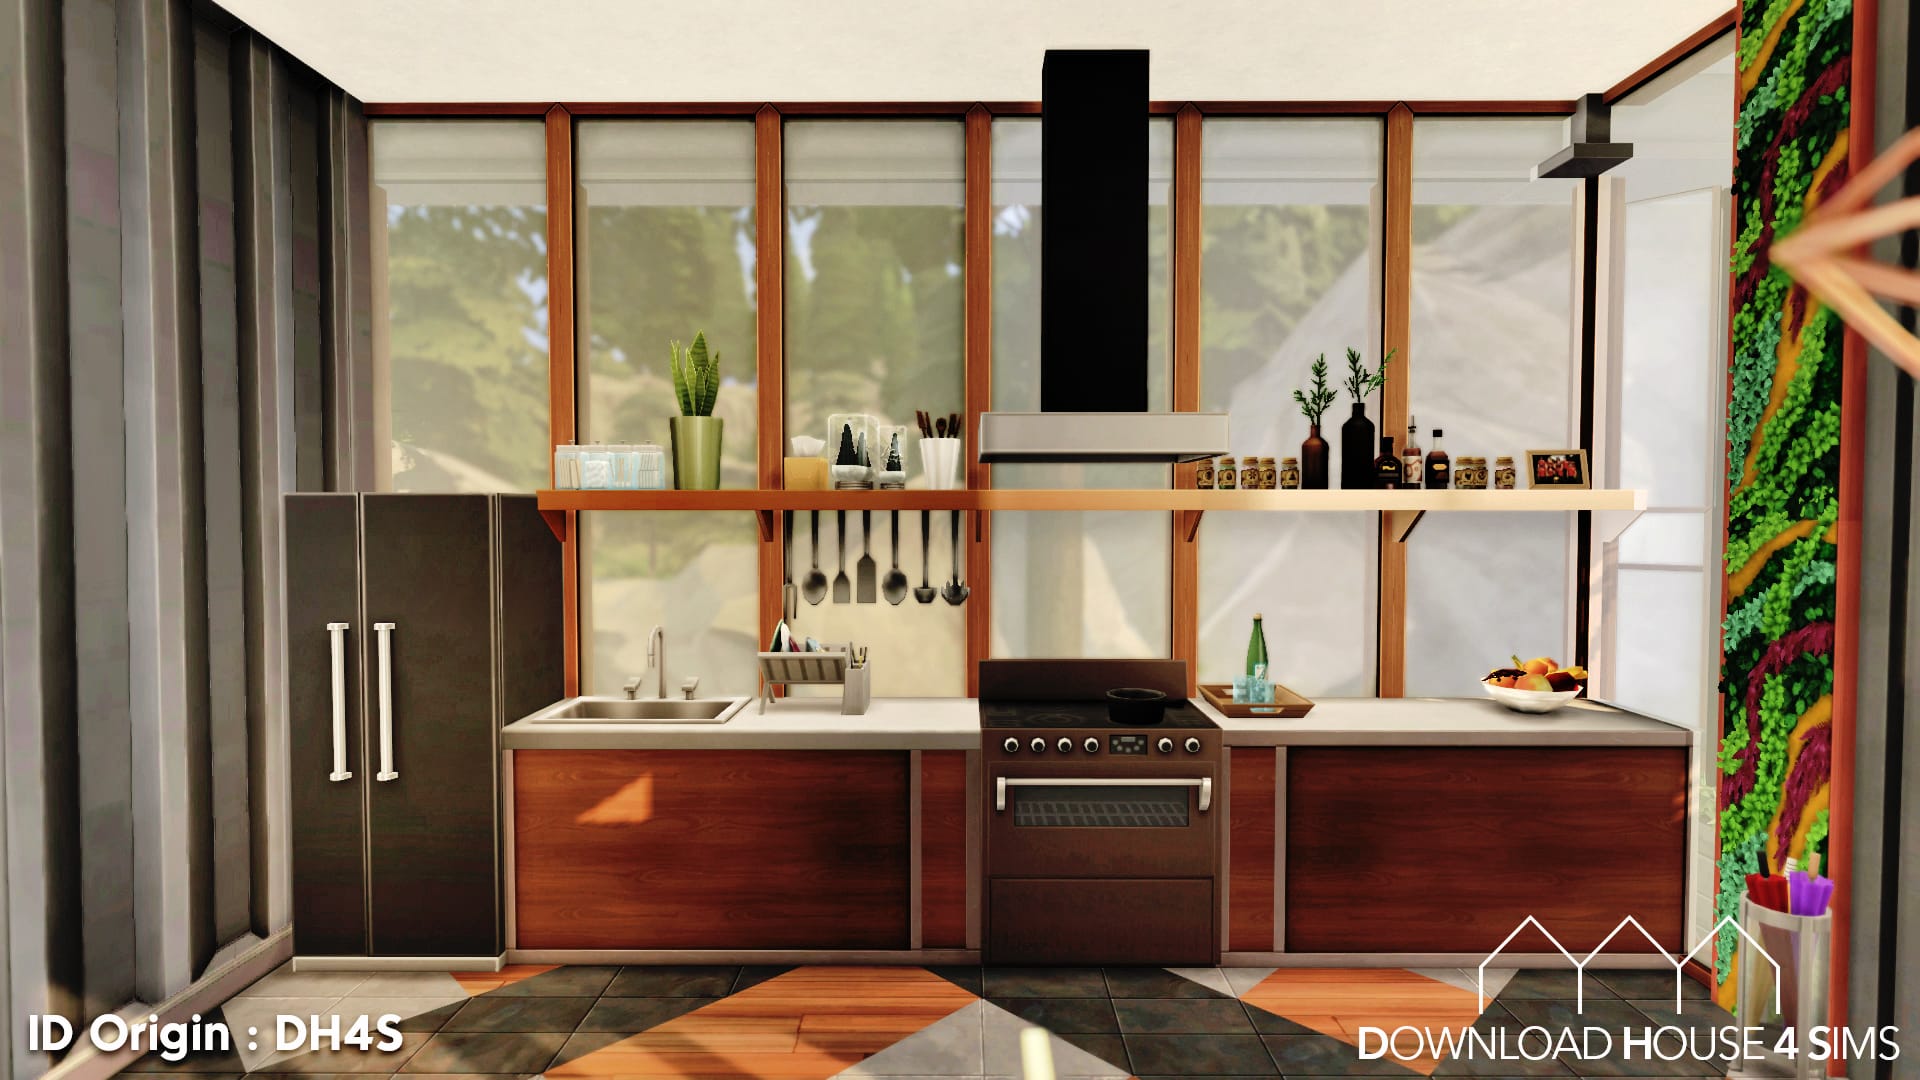 Download House for sims - suspended modern house